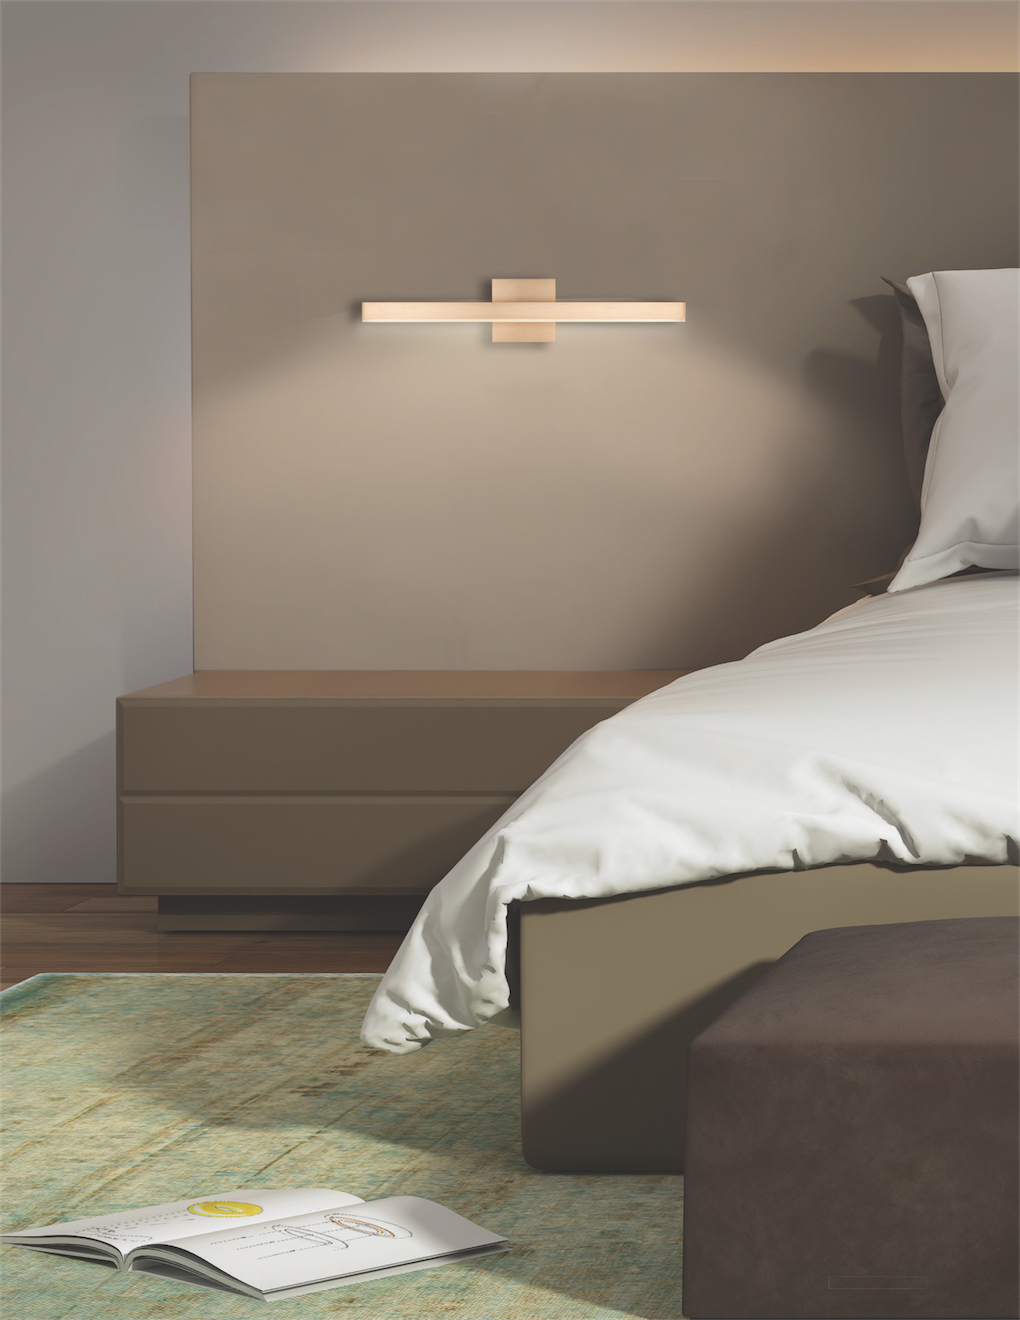 Wall Sconce Lighting Modern VEGA Kuzco VL10323-GD lit in the bedroom near the bed above the bedside table